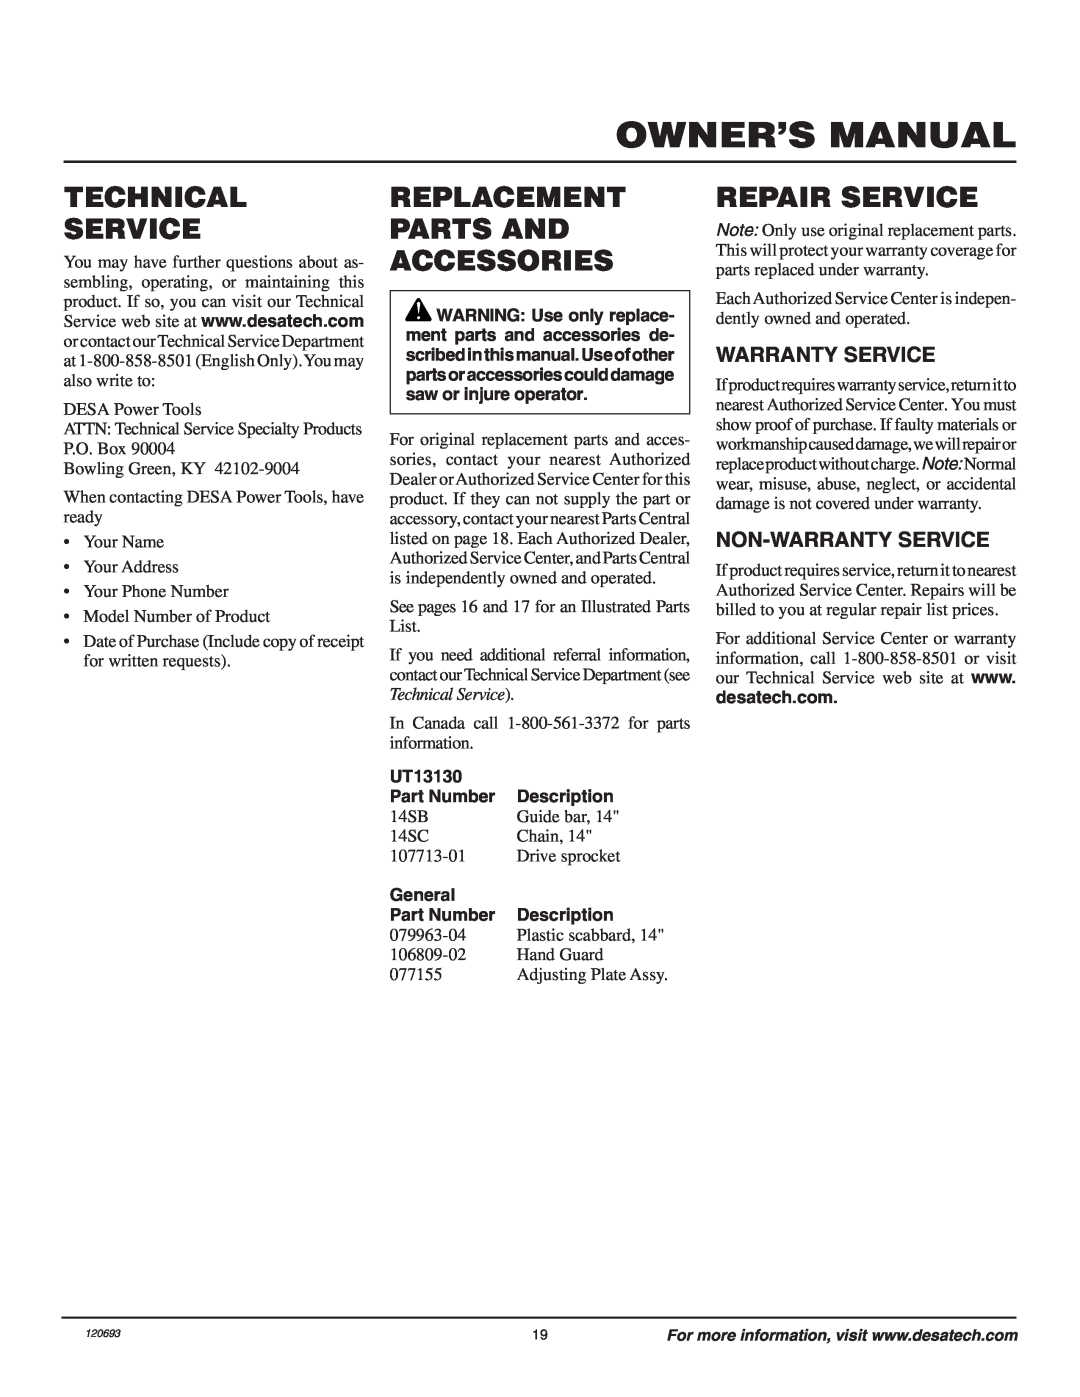 Homelite UT13130 Technical Service, Replacement Parts And accessories, repair SERVICE, Warranty Service, Part Number 